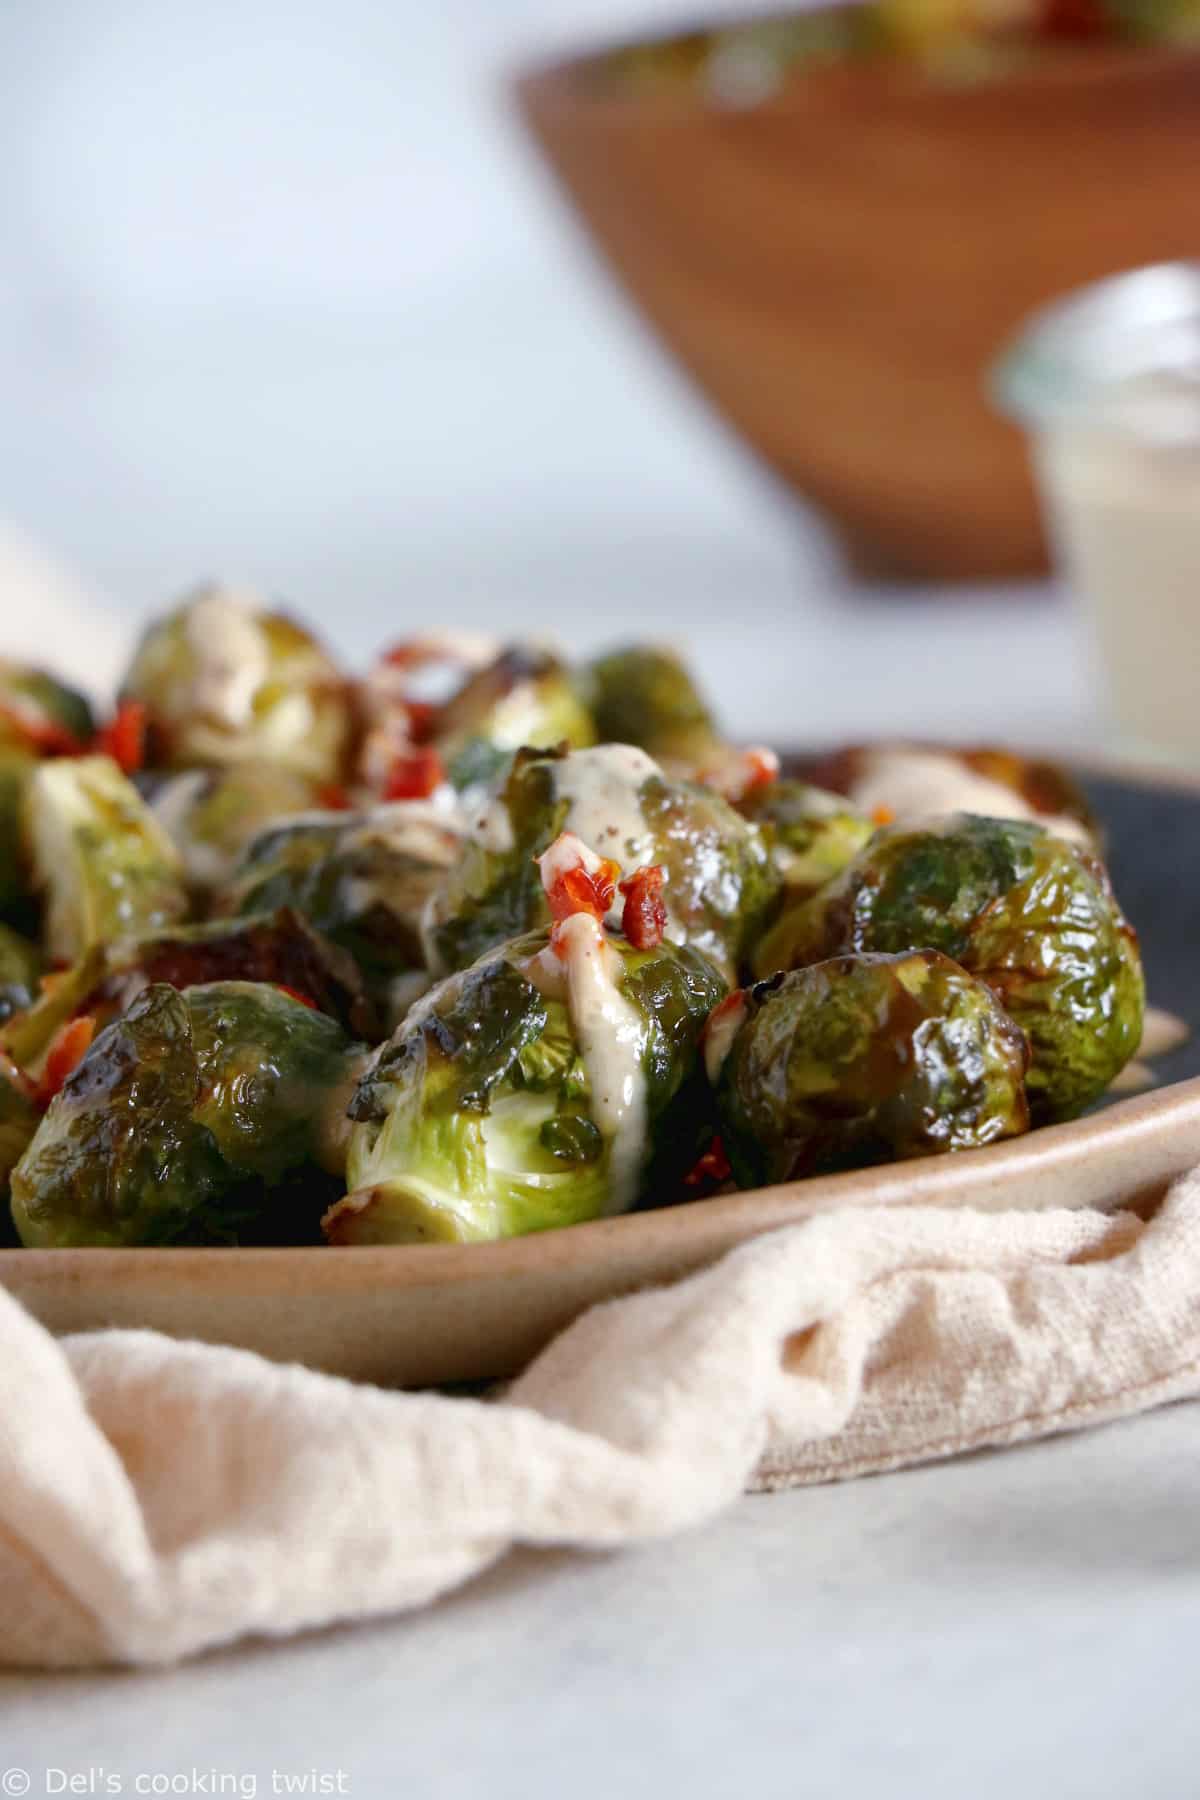 Soy roasted Brussels sprouts with cashew sauce are crispy, tender, with a subtle Asian touch.